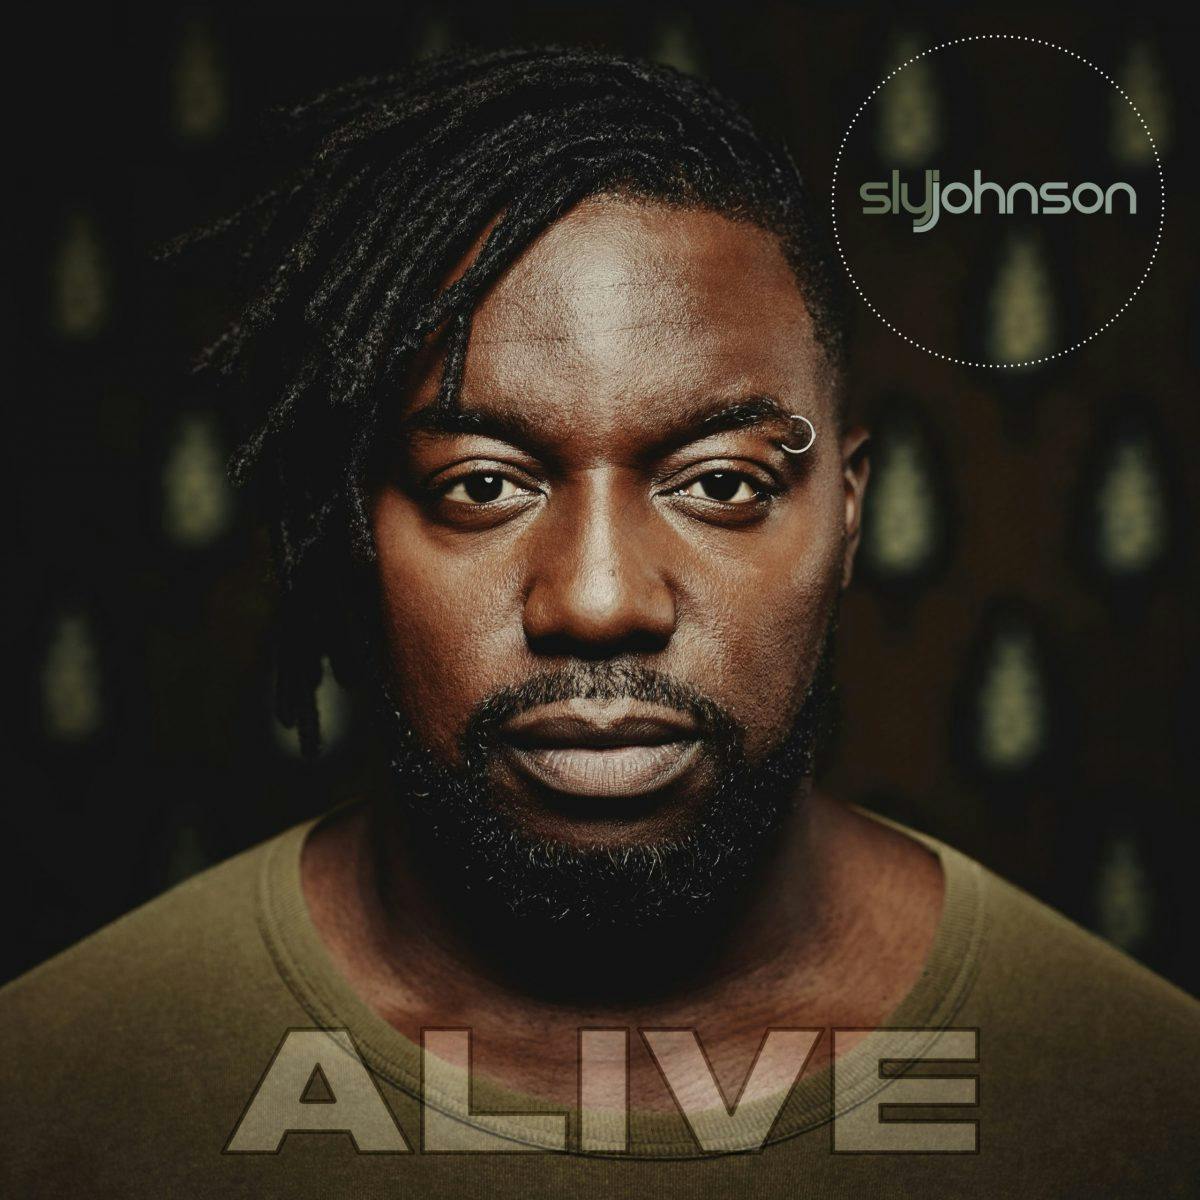 The second single taken from forthcoming album ’55.4’, Sly Johnson presents ‘Alive’, a timely hip hop / soul gem on BBE Music.